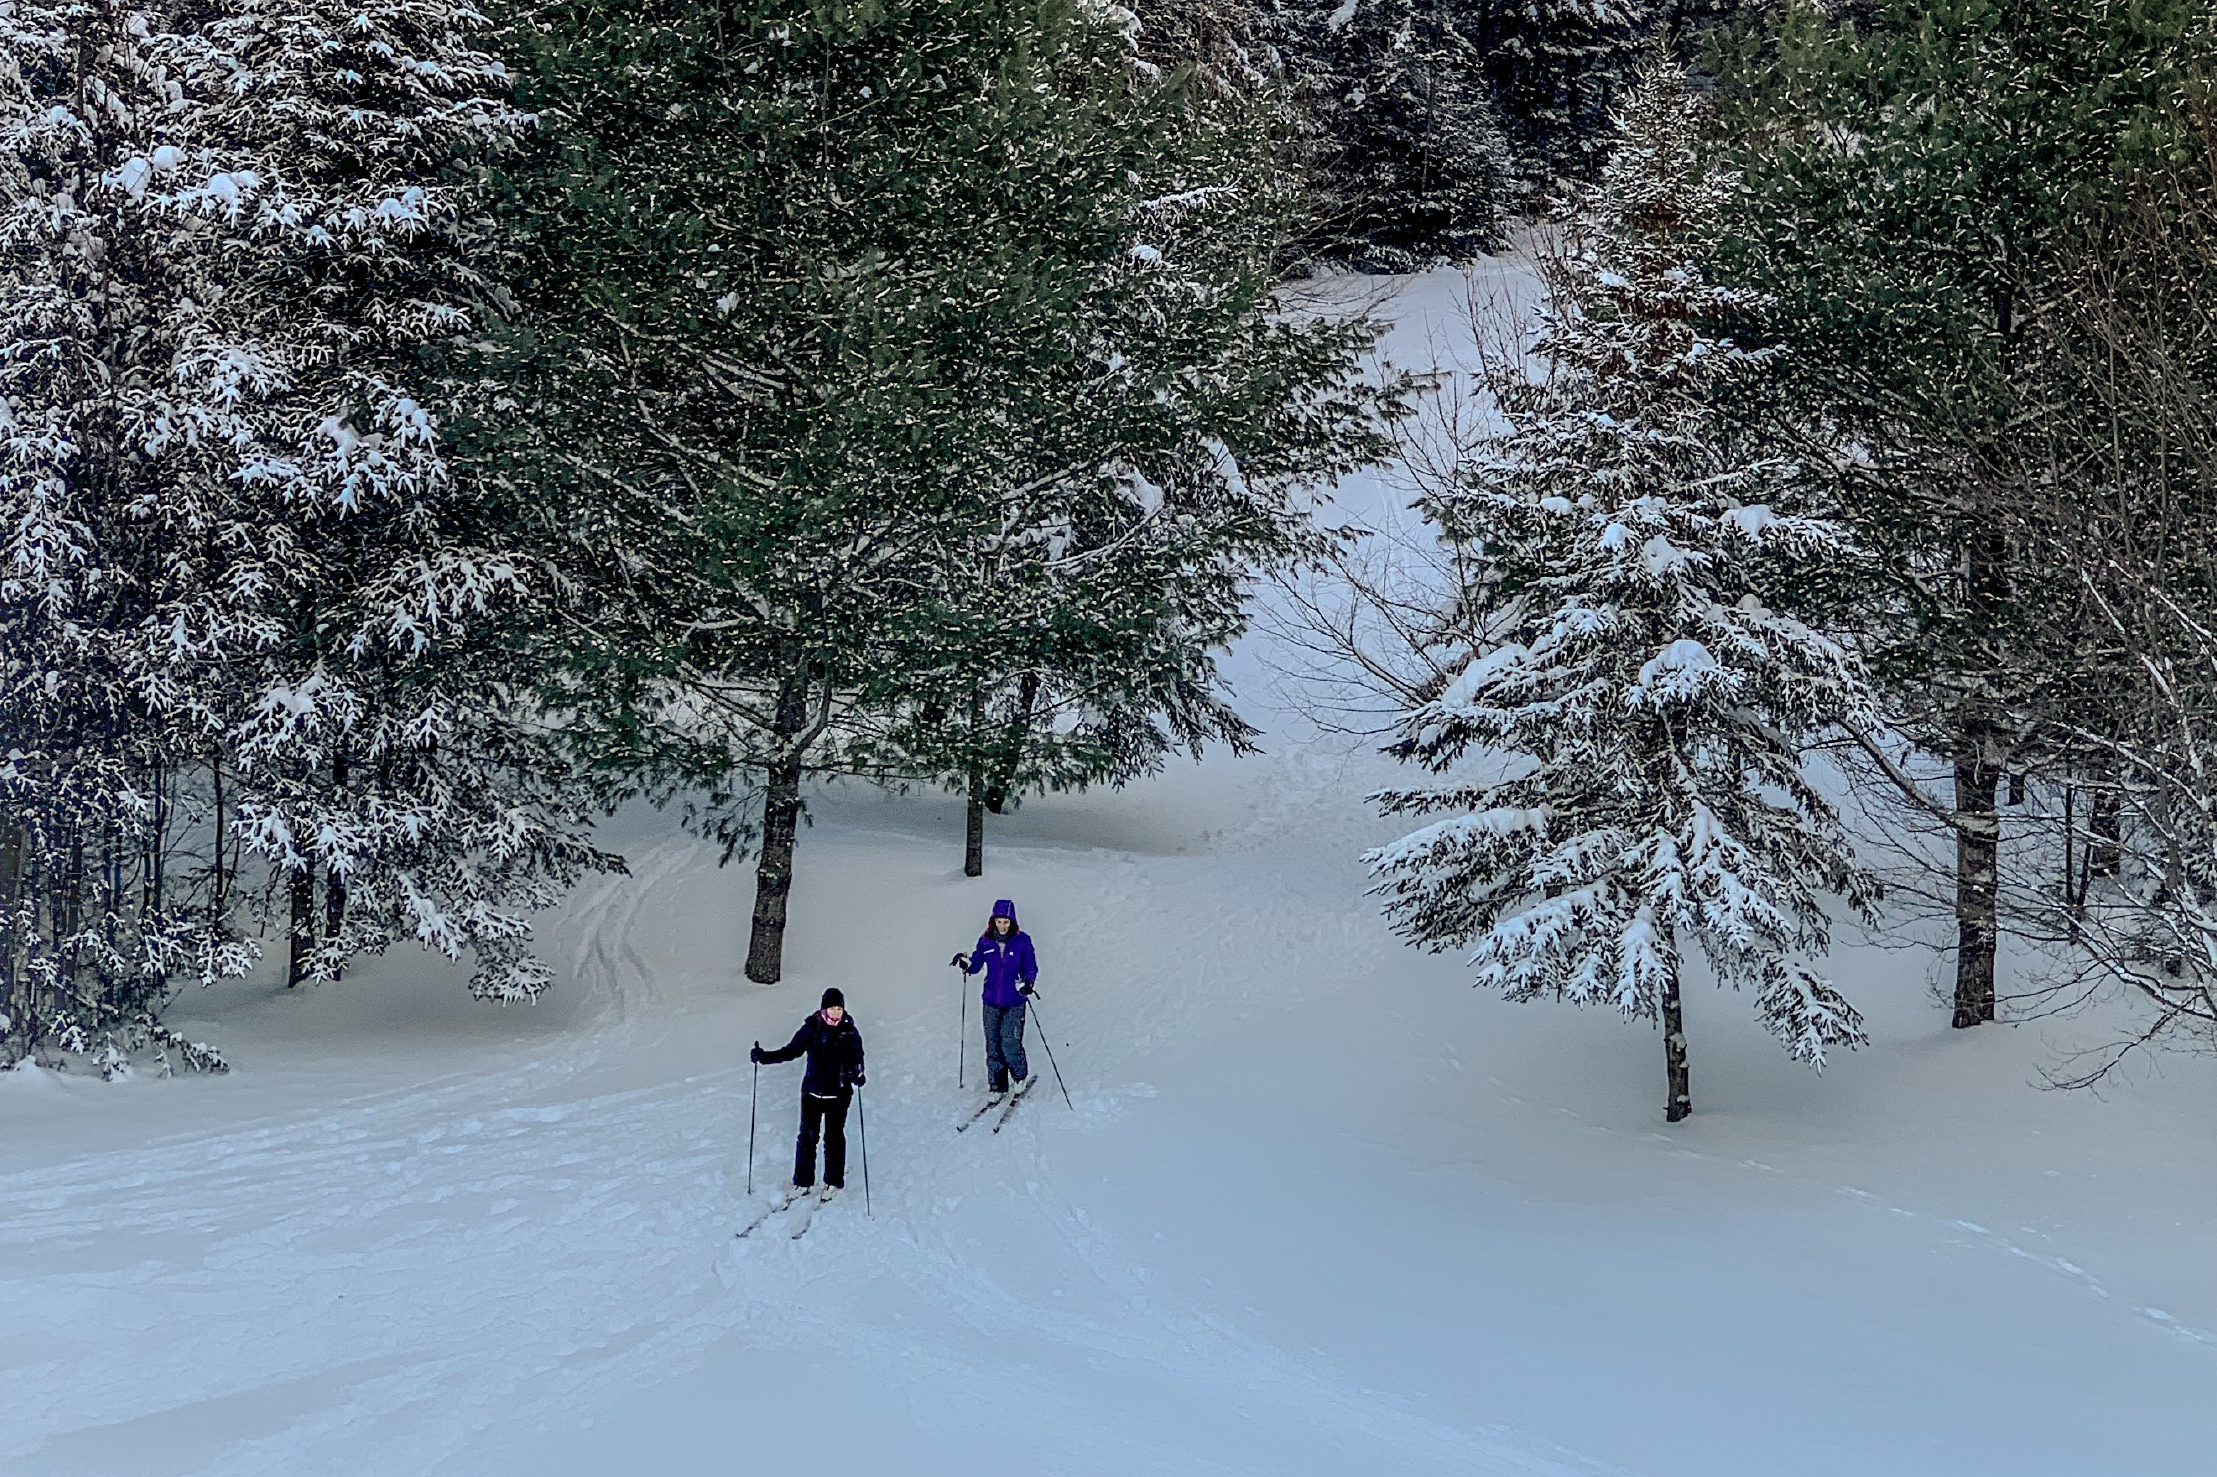 Two cross-country skiers hit the snowy slopes in Park City while surrounded by beautiful pine trees.